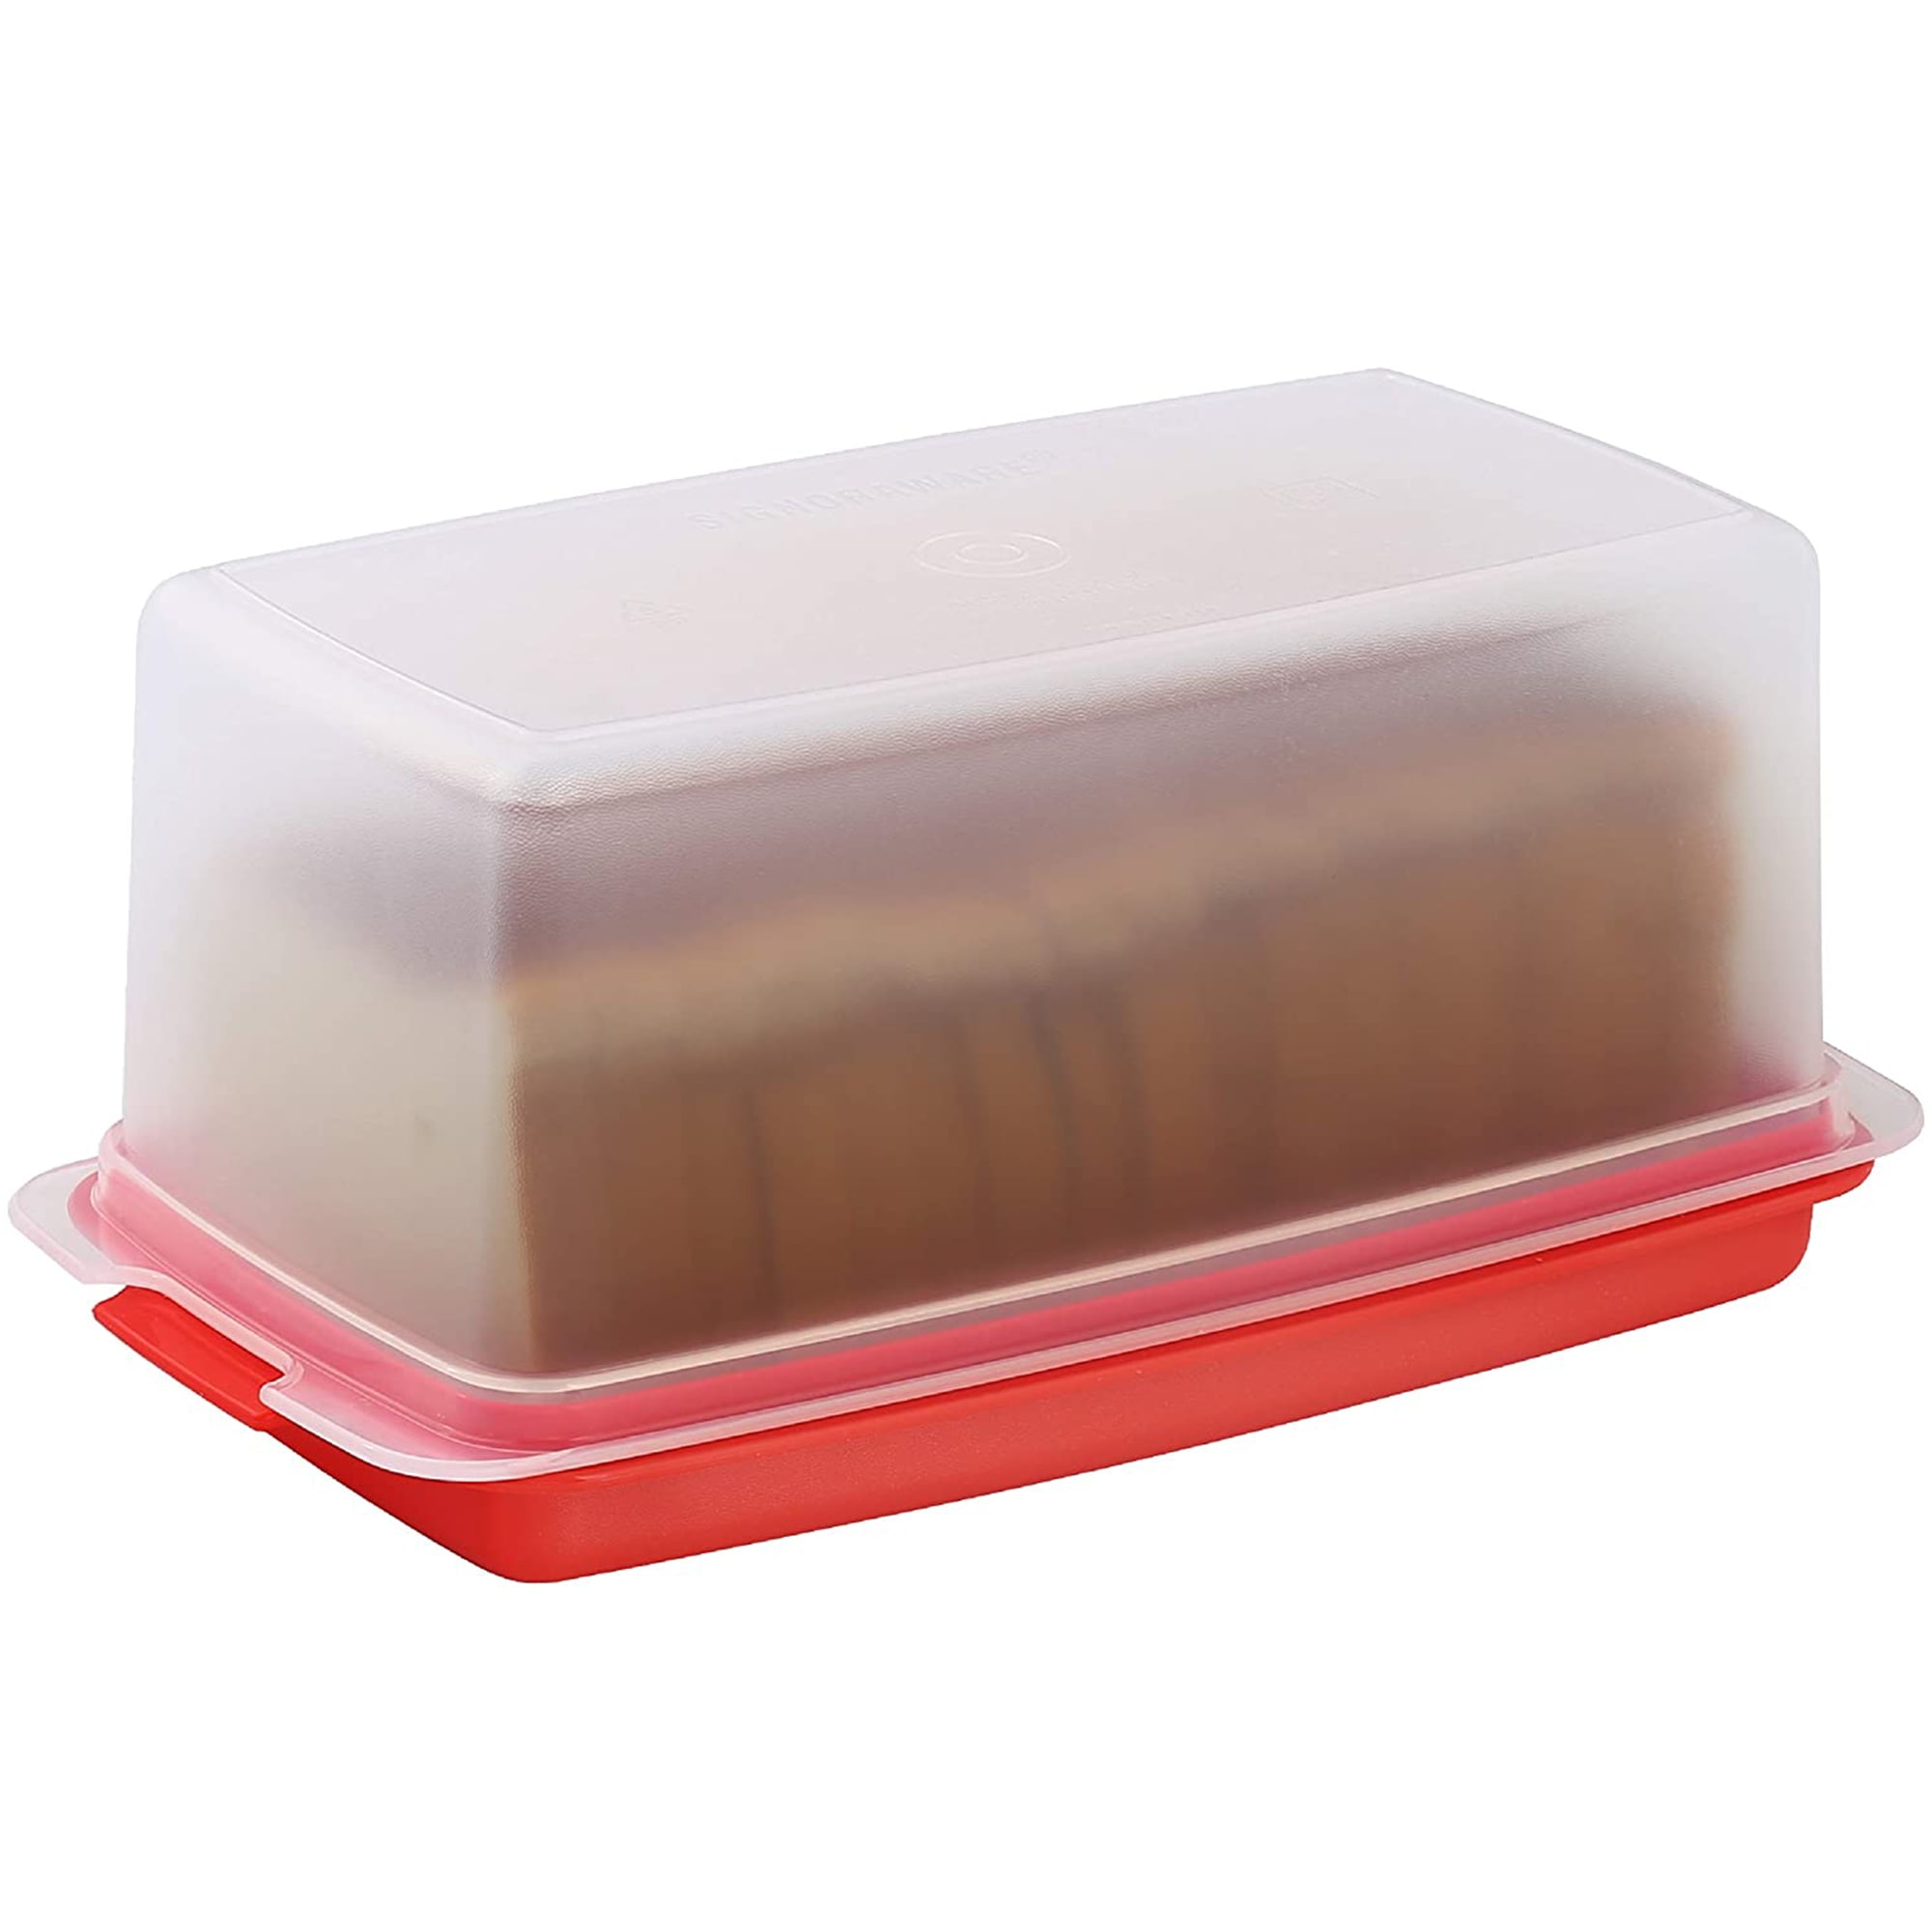  Tupperware Bread Saver- Storage Container & Bread Box for Bread,  Pastries, Bagels & More, CondensControl- Moisture Control Technology, Keeps  Bread Fresher Longer- 12.63 x 6.5 x 6: Home & Kitchen